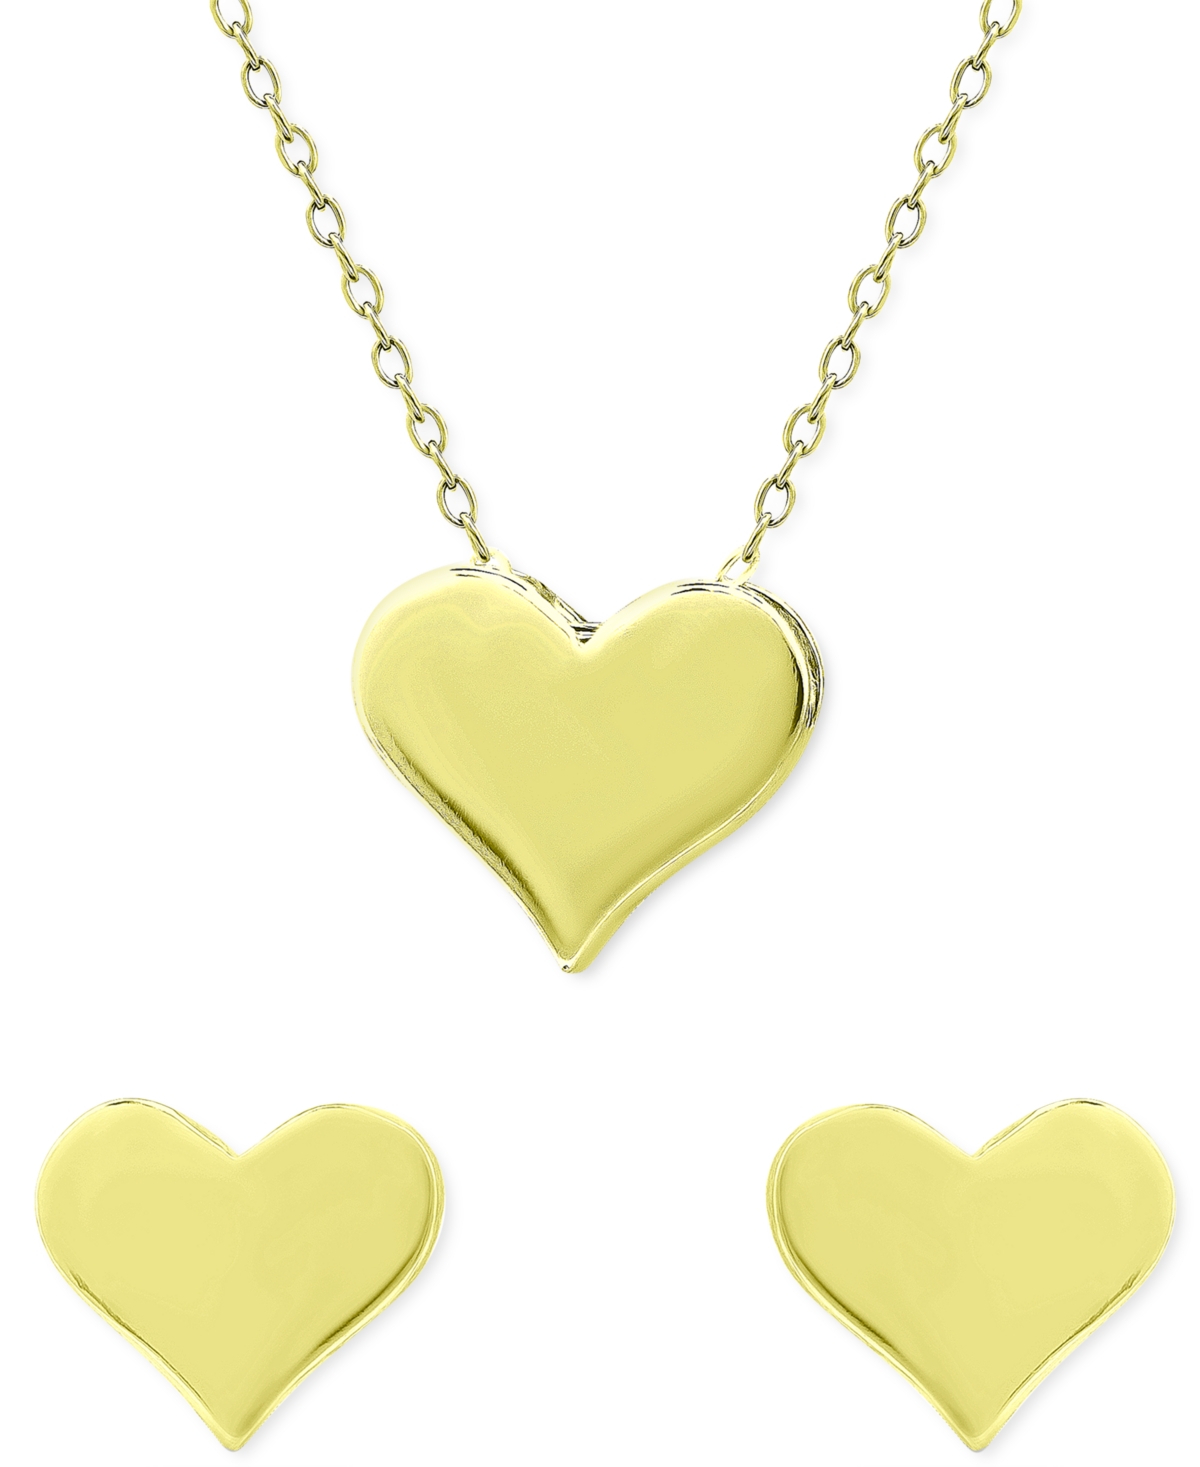 Giani Bernini 2-pc. Set Polished Heart Pendant Necklace & Matching Stud Earrings, Created For Macy's In Gold Over Silver